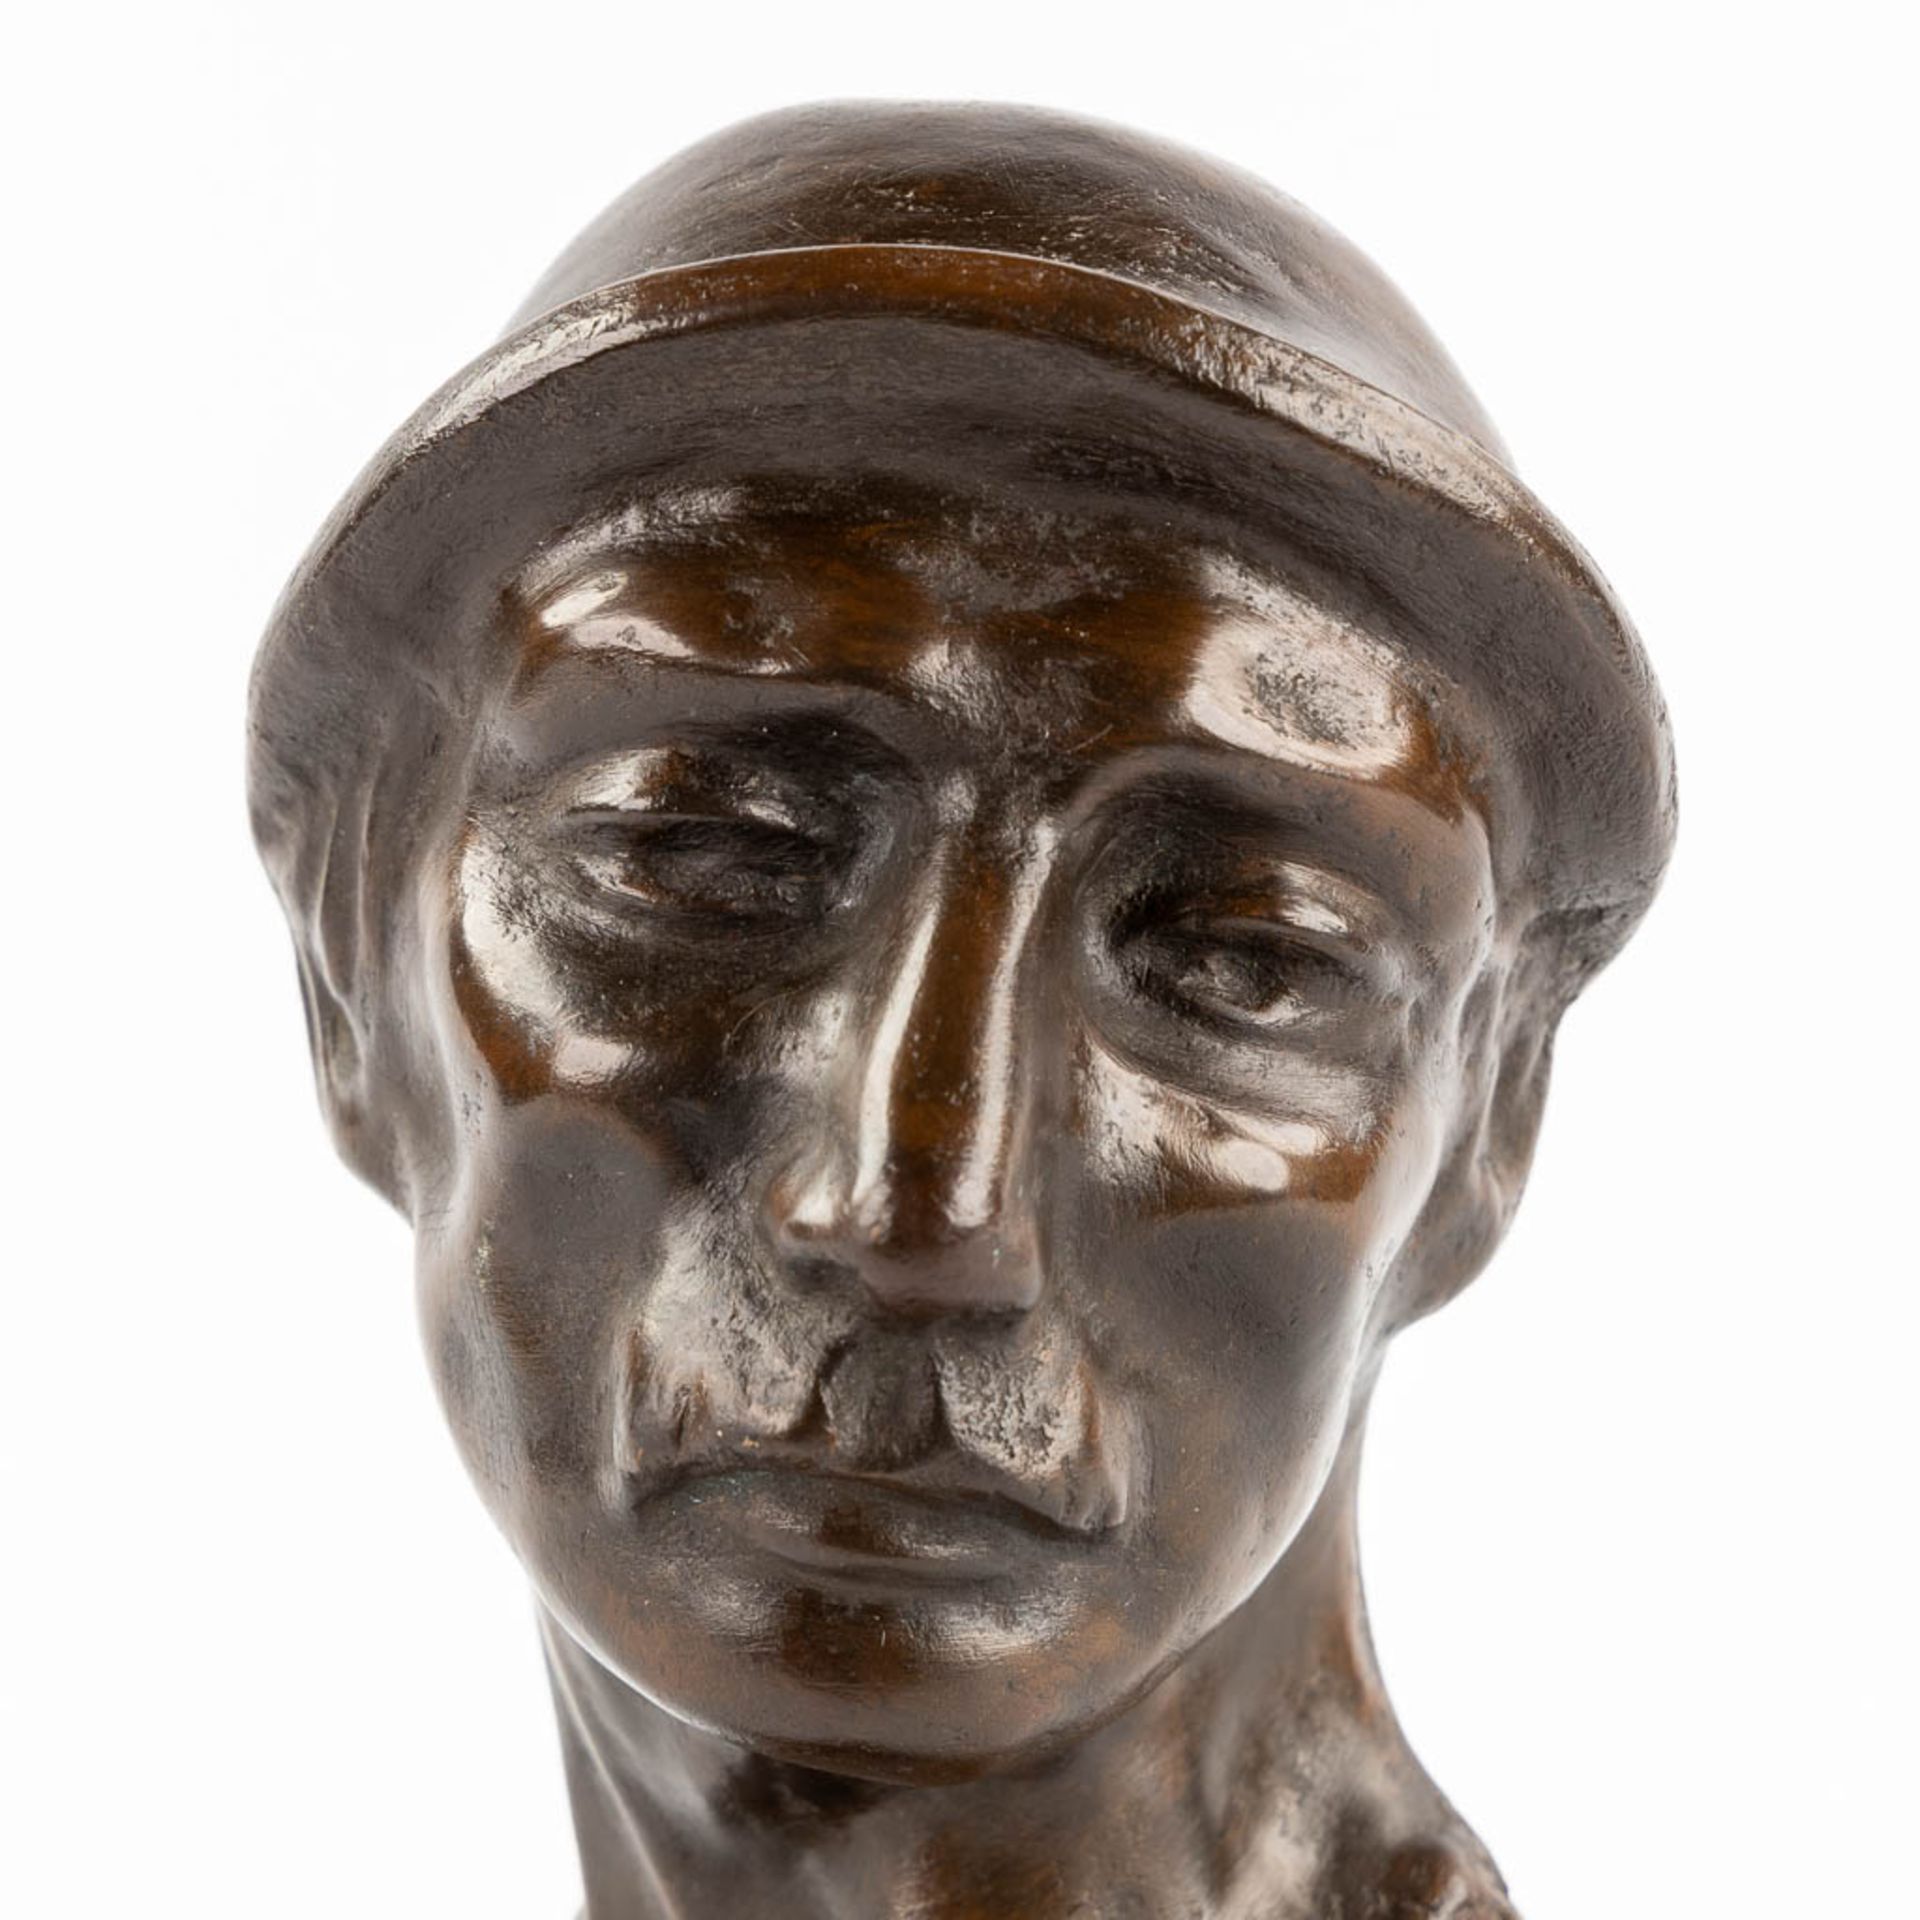 Georges WASTERLAIN (1889-1963) 'Mineur' patinated bronze. (L:11 x W:13 x H:26,5 cm) - Image 8 of 11